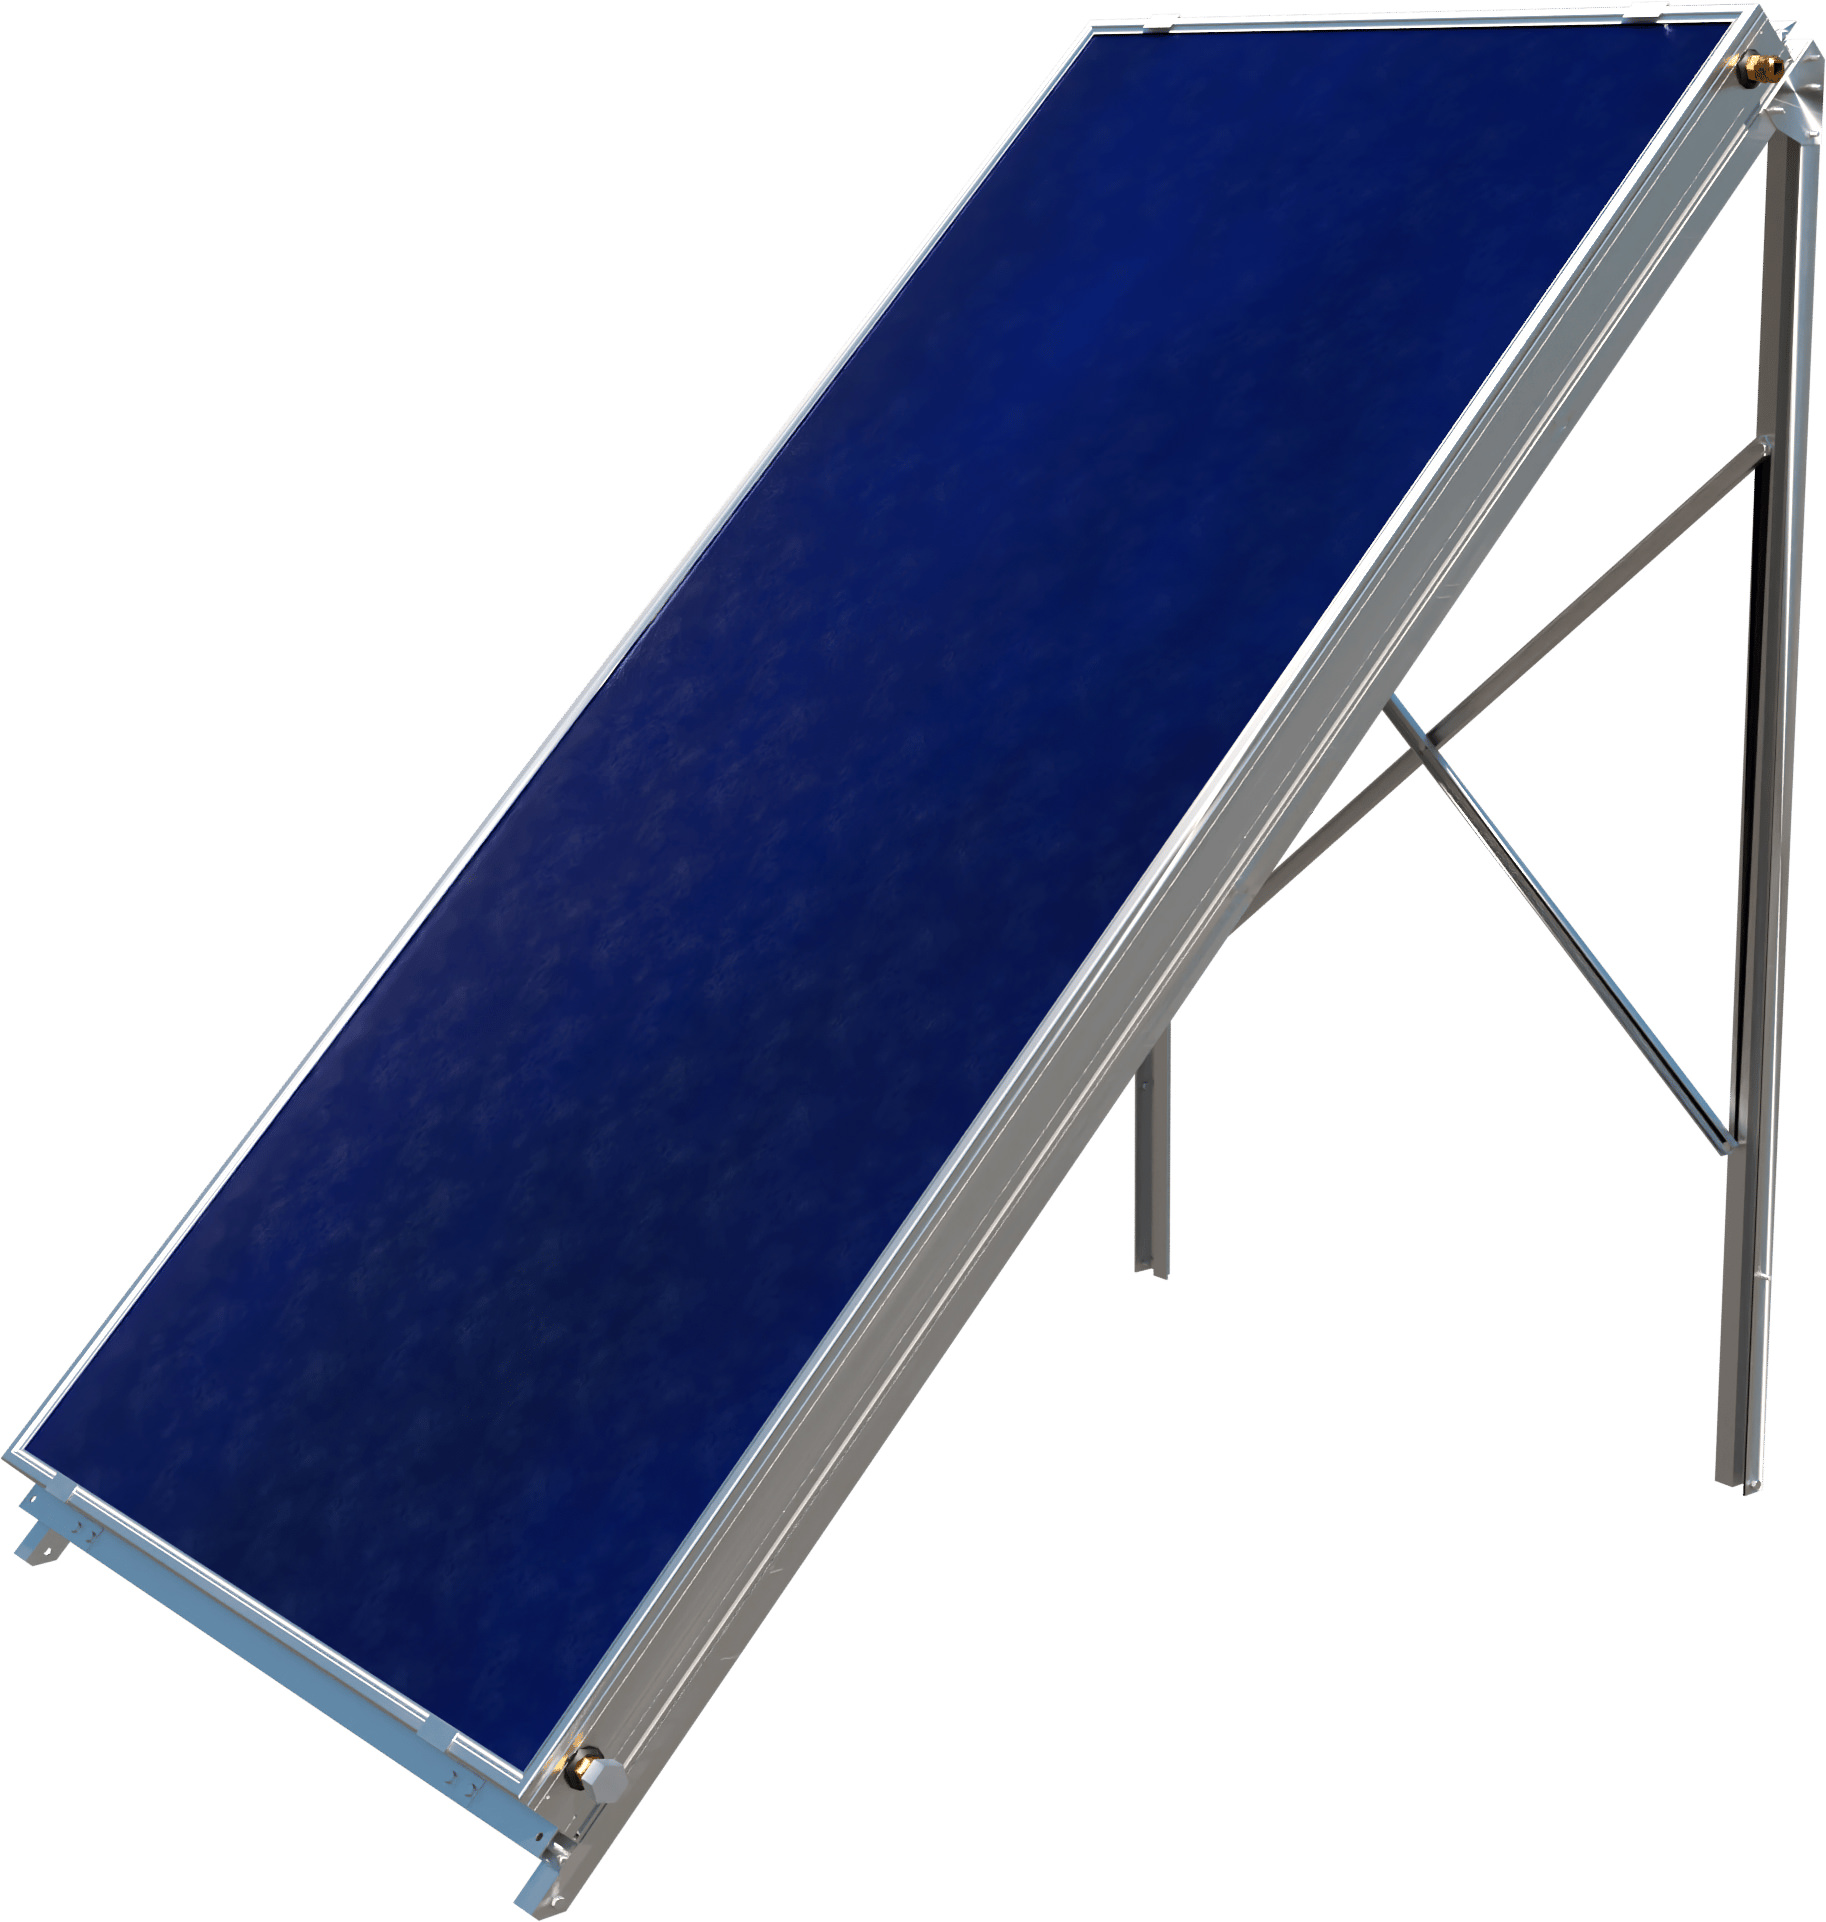 SunRain Solar Flat Plate Collector with Ground Mounting Stand - SRCC solar water heater